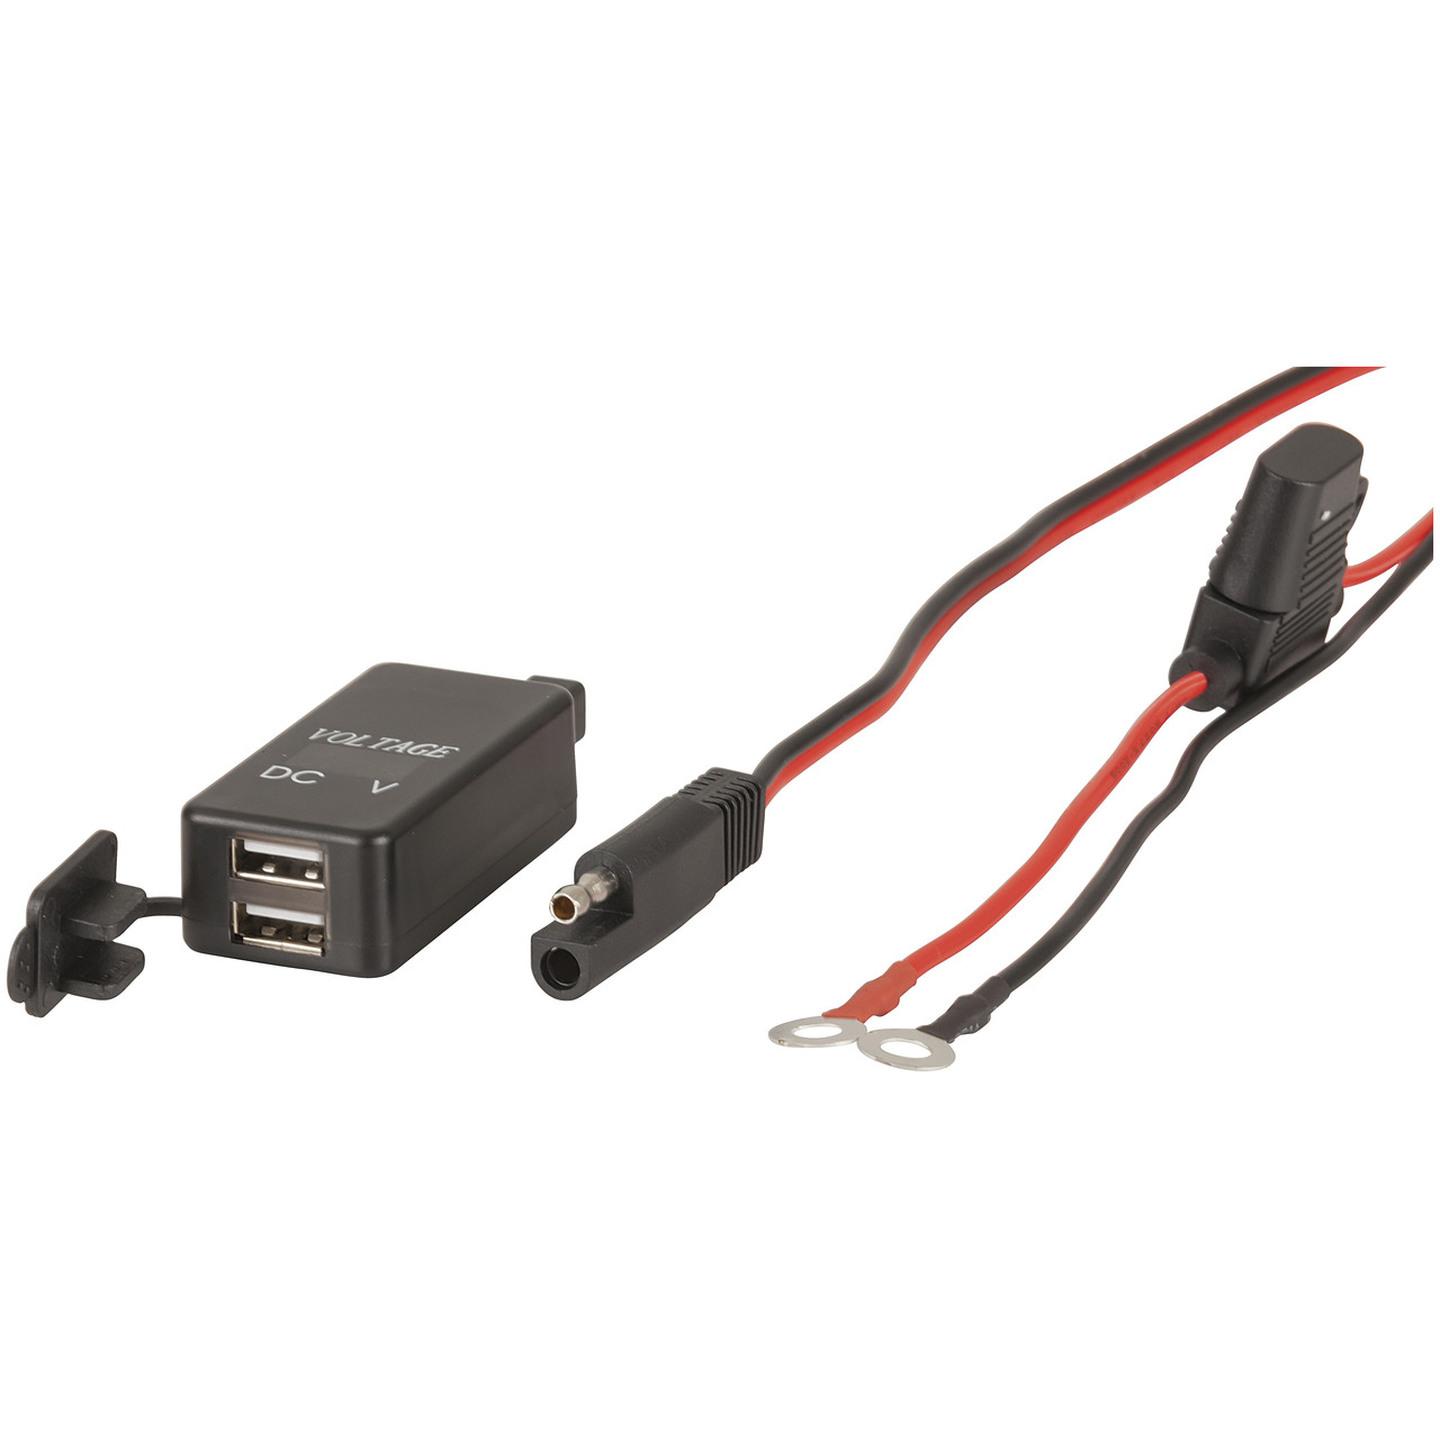 12/24VDC Dual USB Charger with Voltage Display